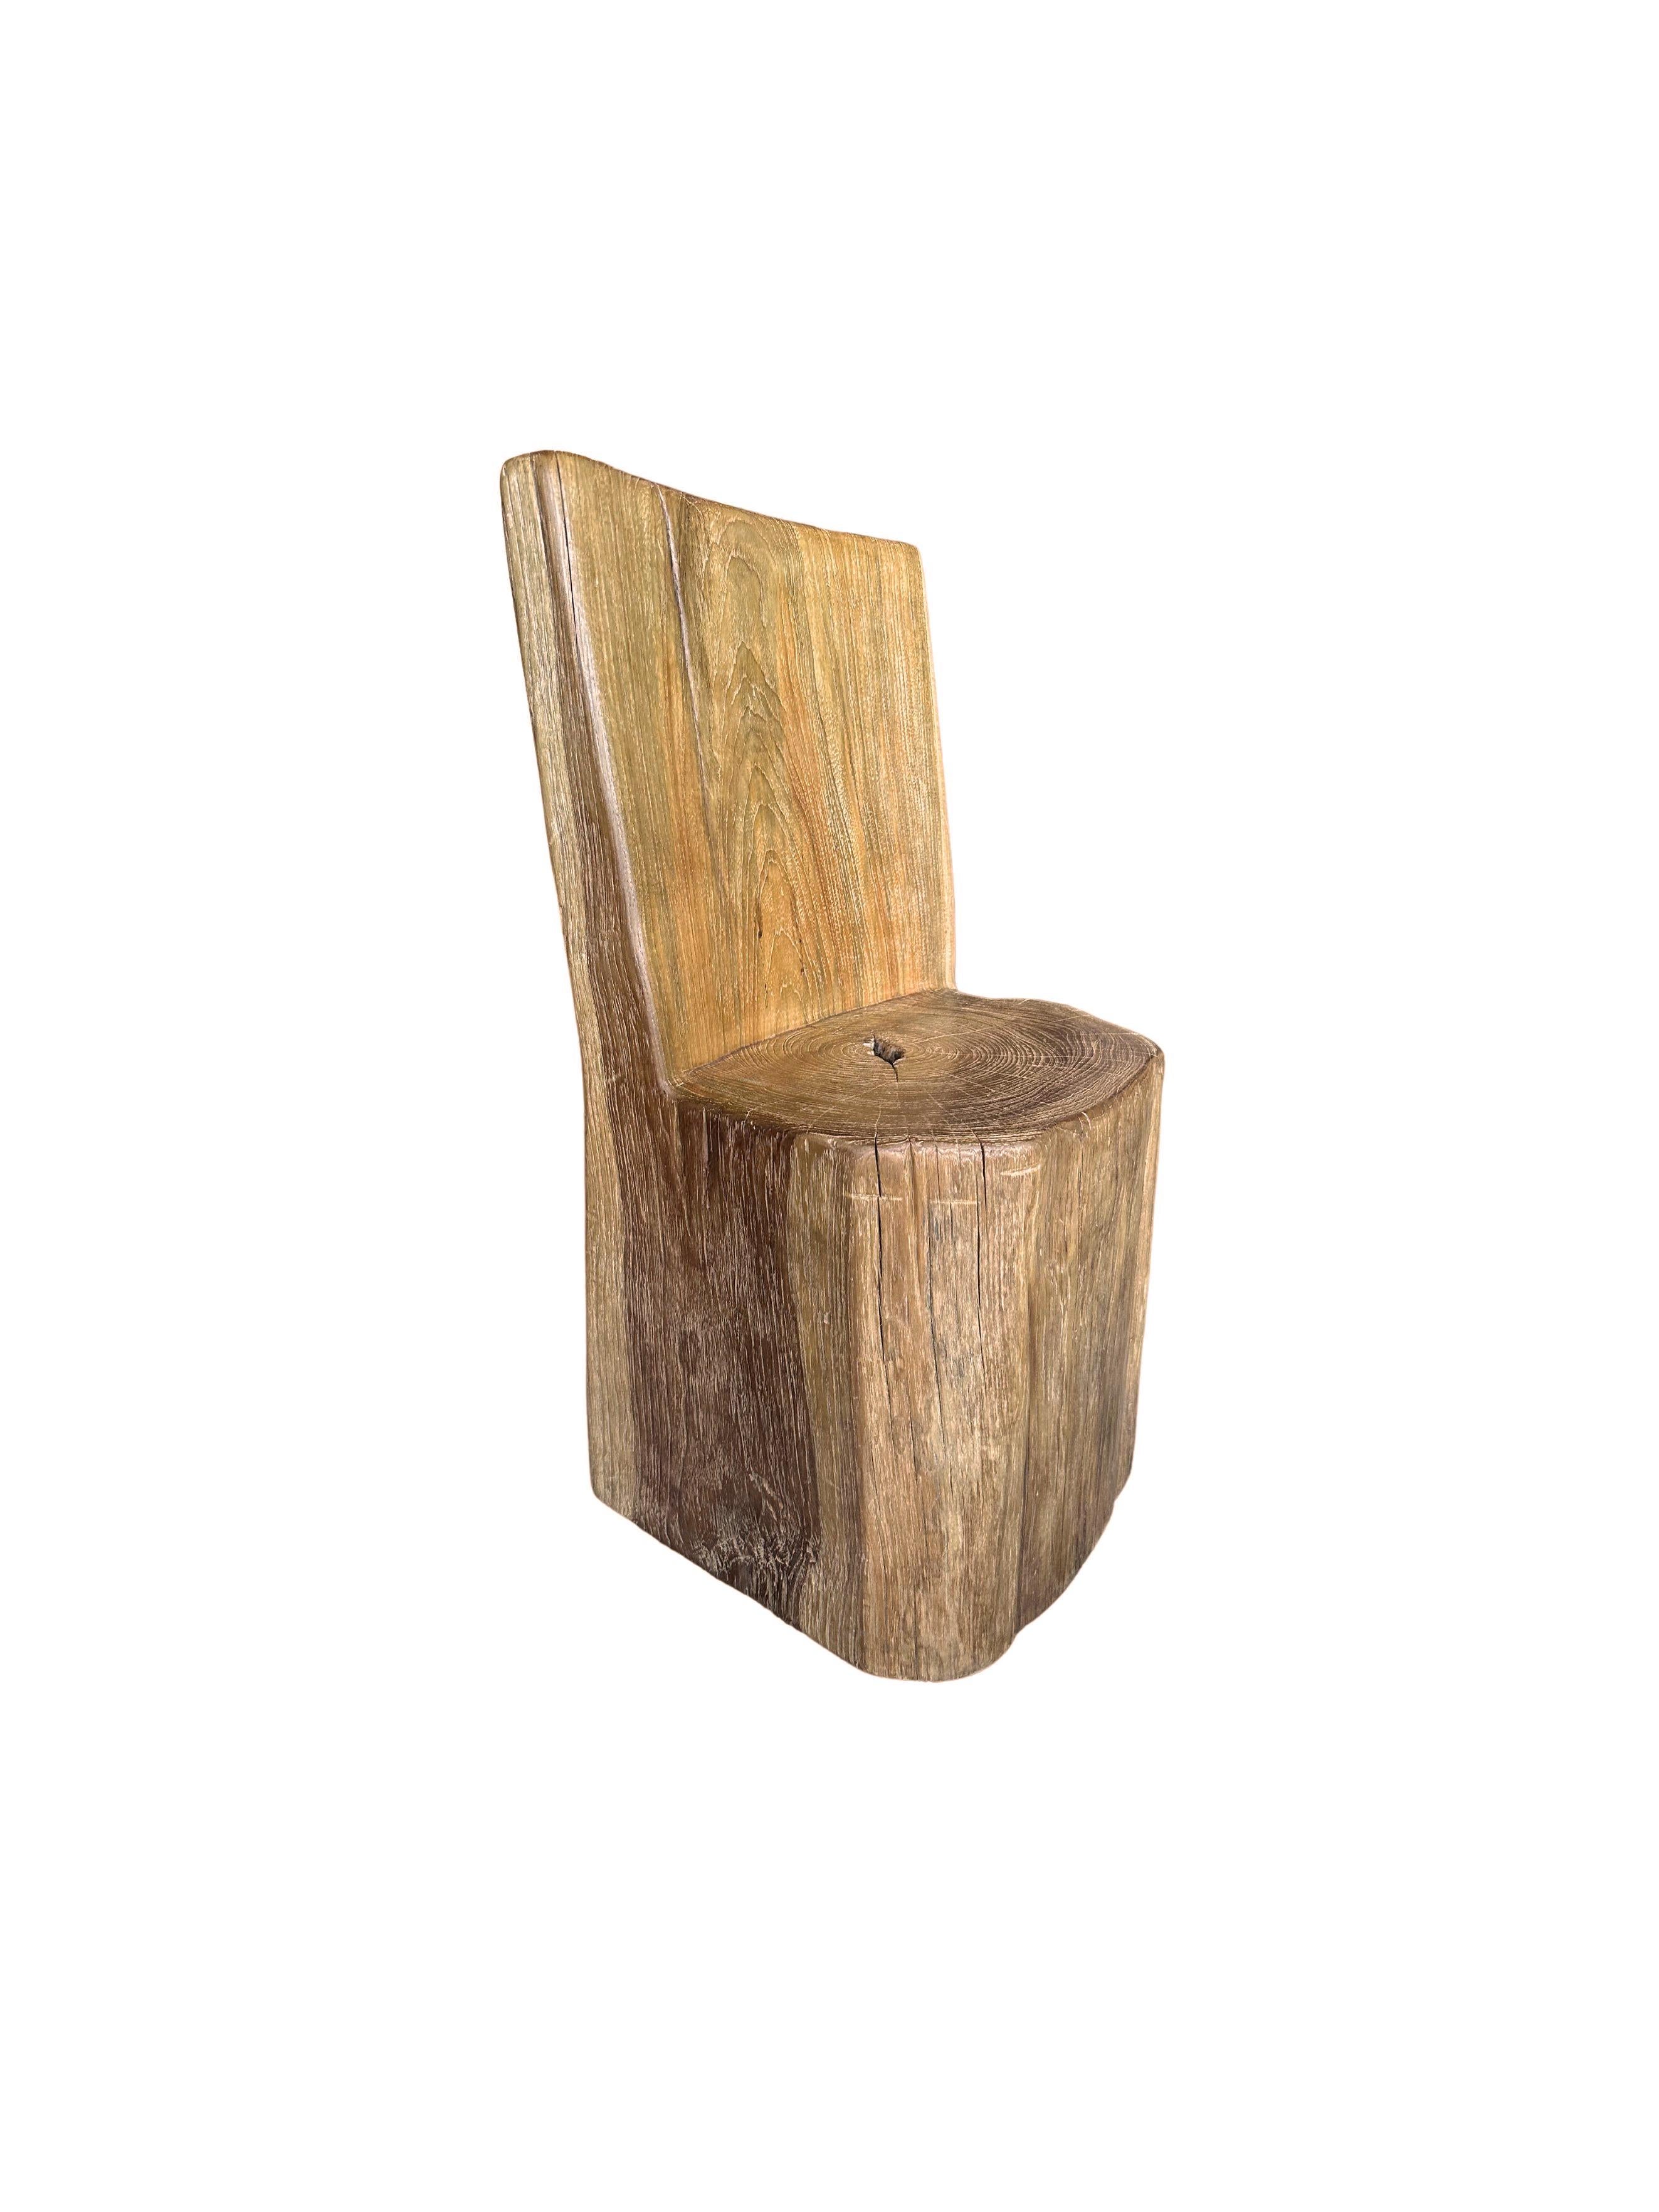 Hand-Crafted Sculptural Soild Teak Wood Chair For Sale